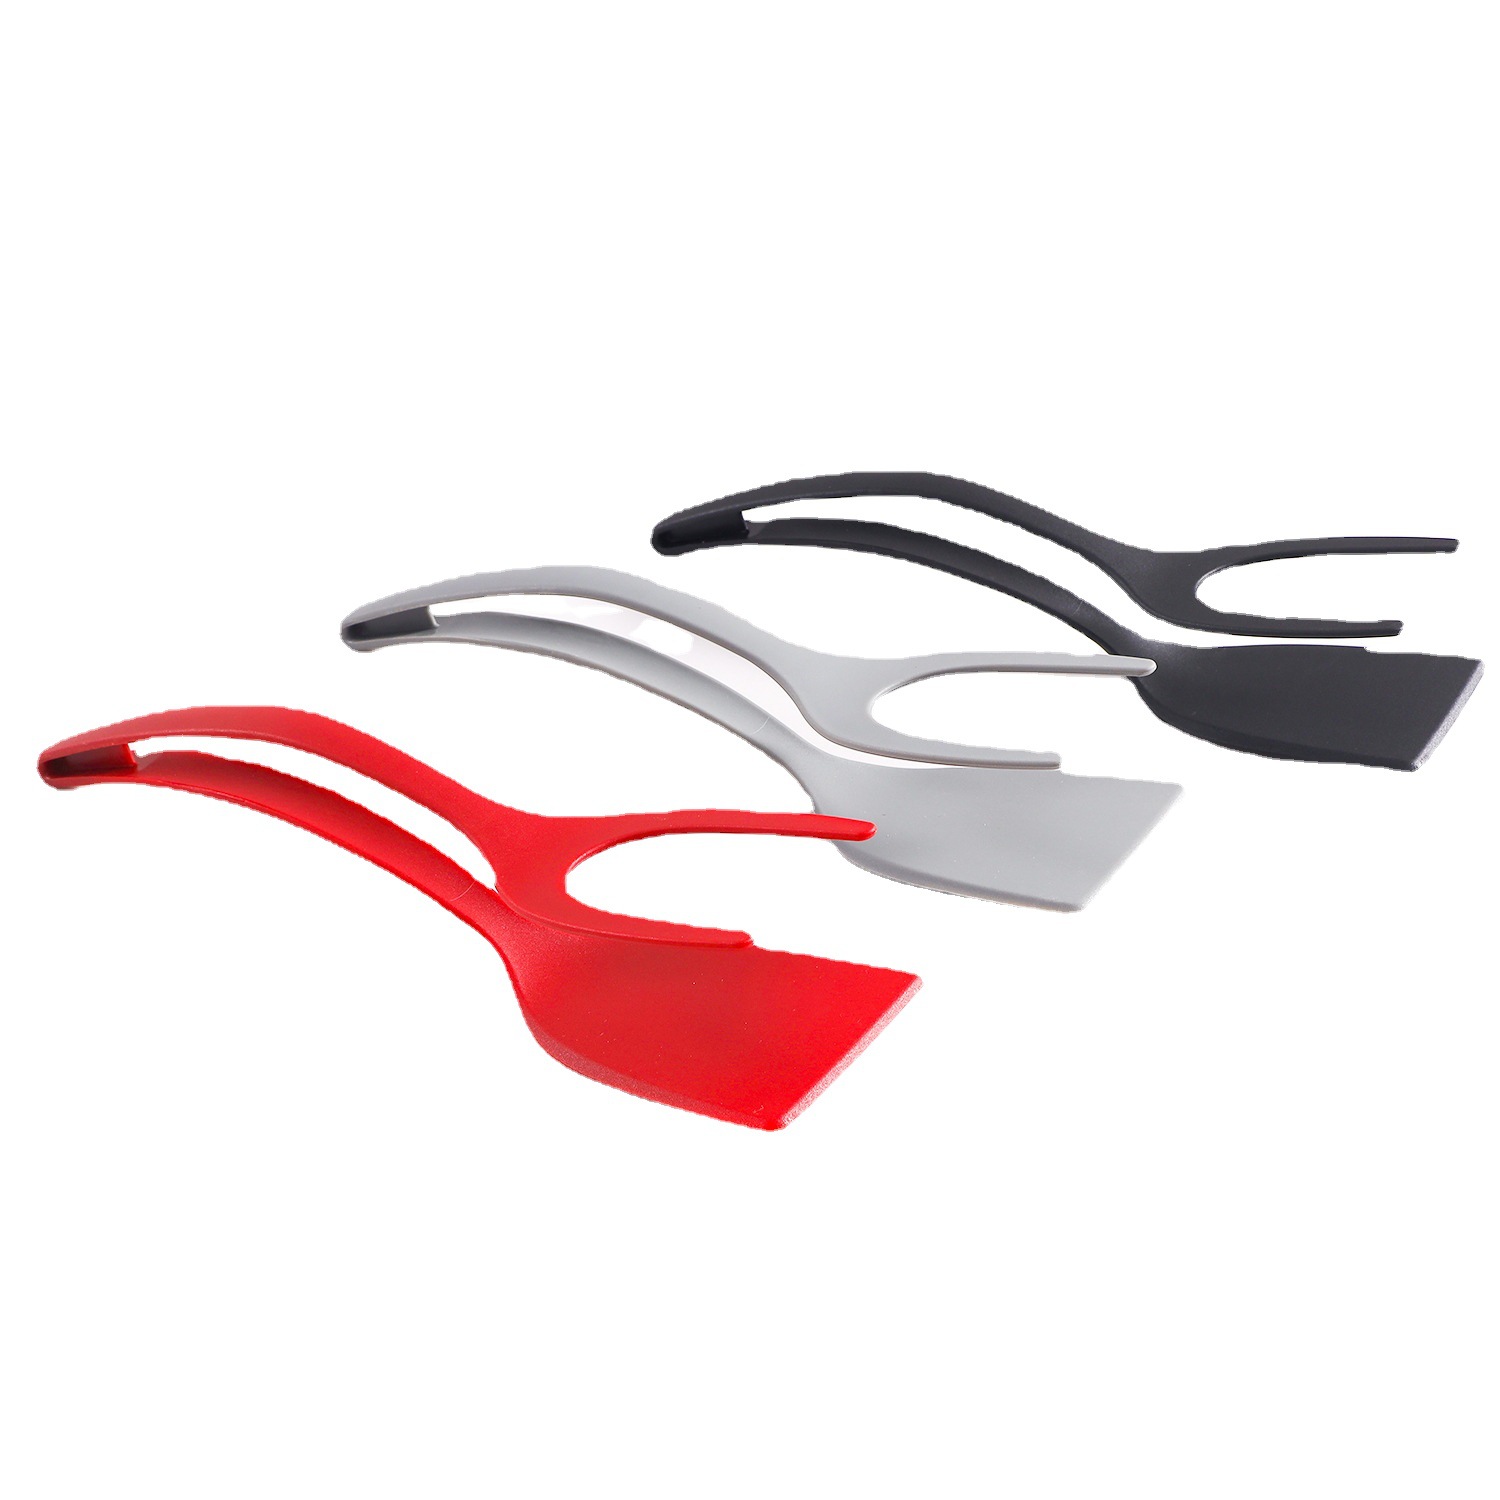 2-in-1 pliers handle and elasticity spatula